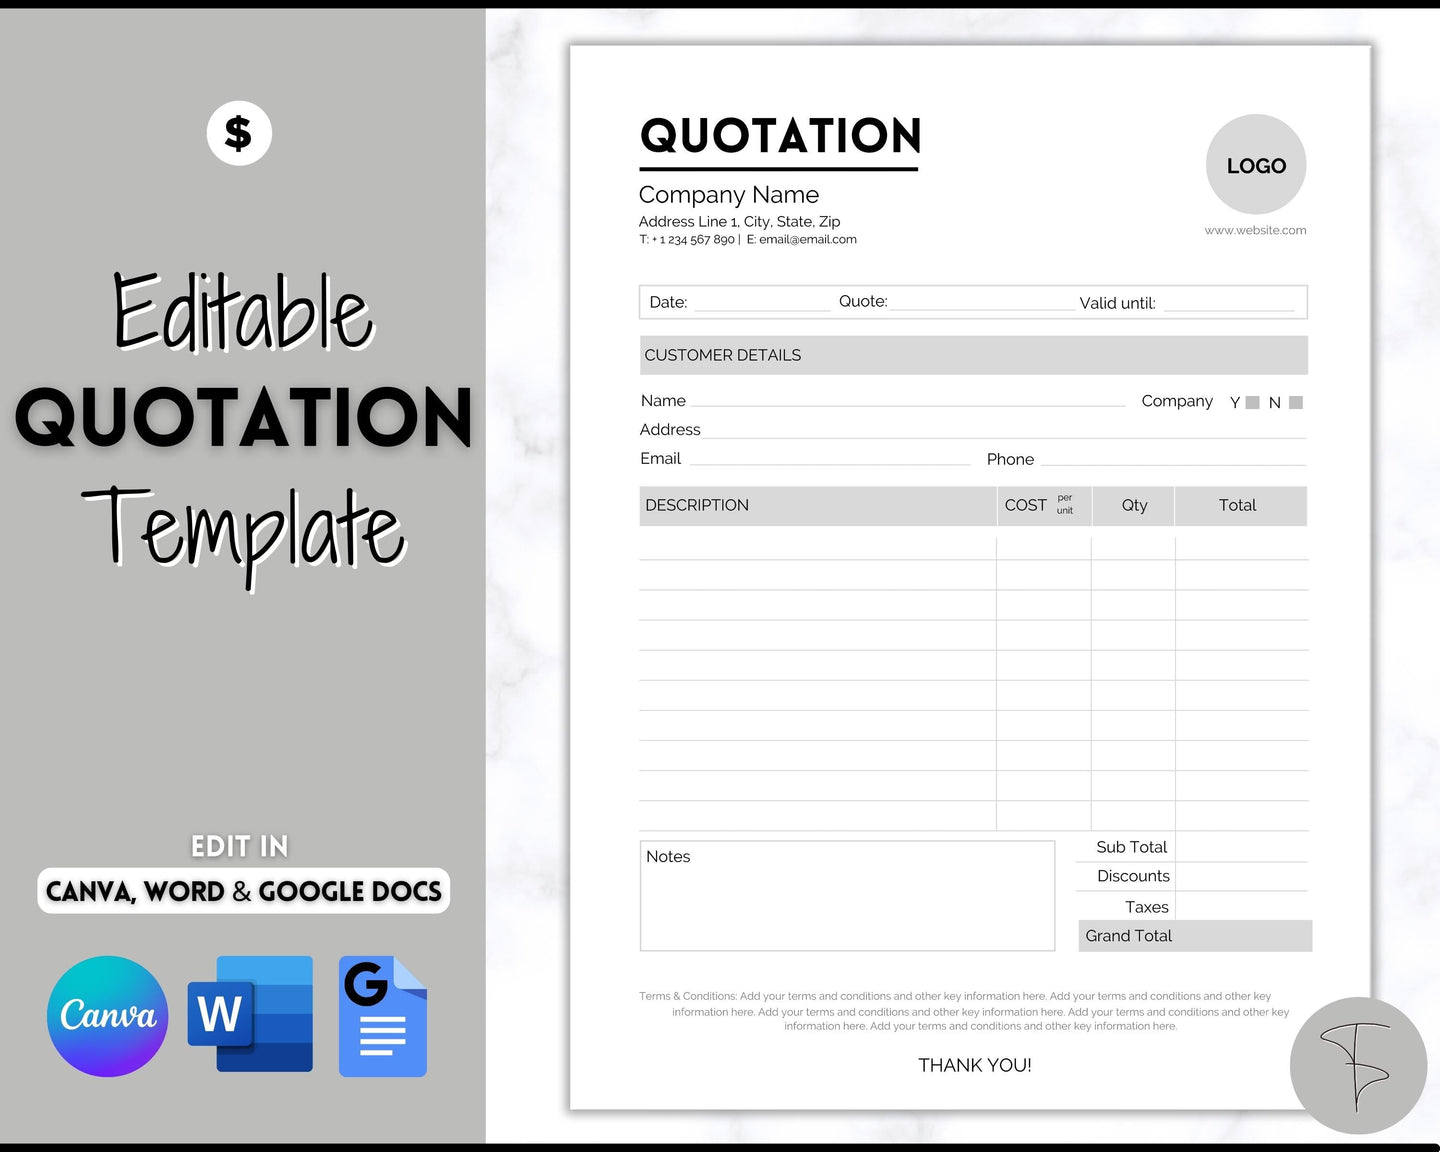 Quotation Template, EDITABLE Quote Form, Small Business, Invoice Order, Job Estimate Form, Word, Canva, Google Docs, Proposal